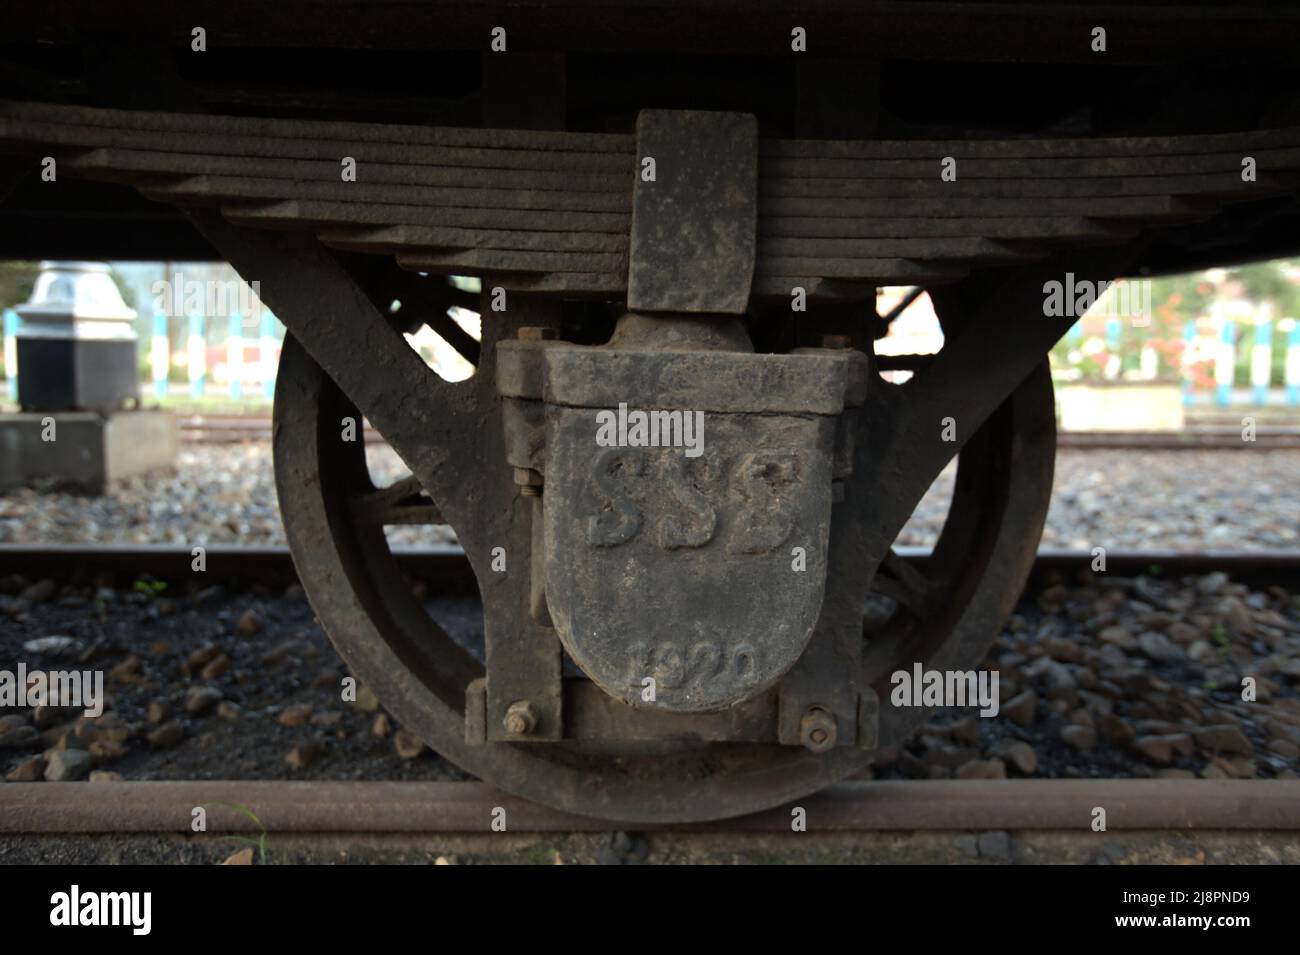 A train wheel at the train museum in Sawahlunto, a former coal-mining town established by Dutch colonialists in late 19th century in West Sumatra, Indonesia. Stock Photo